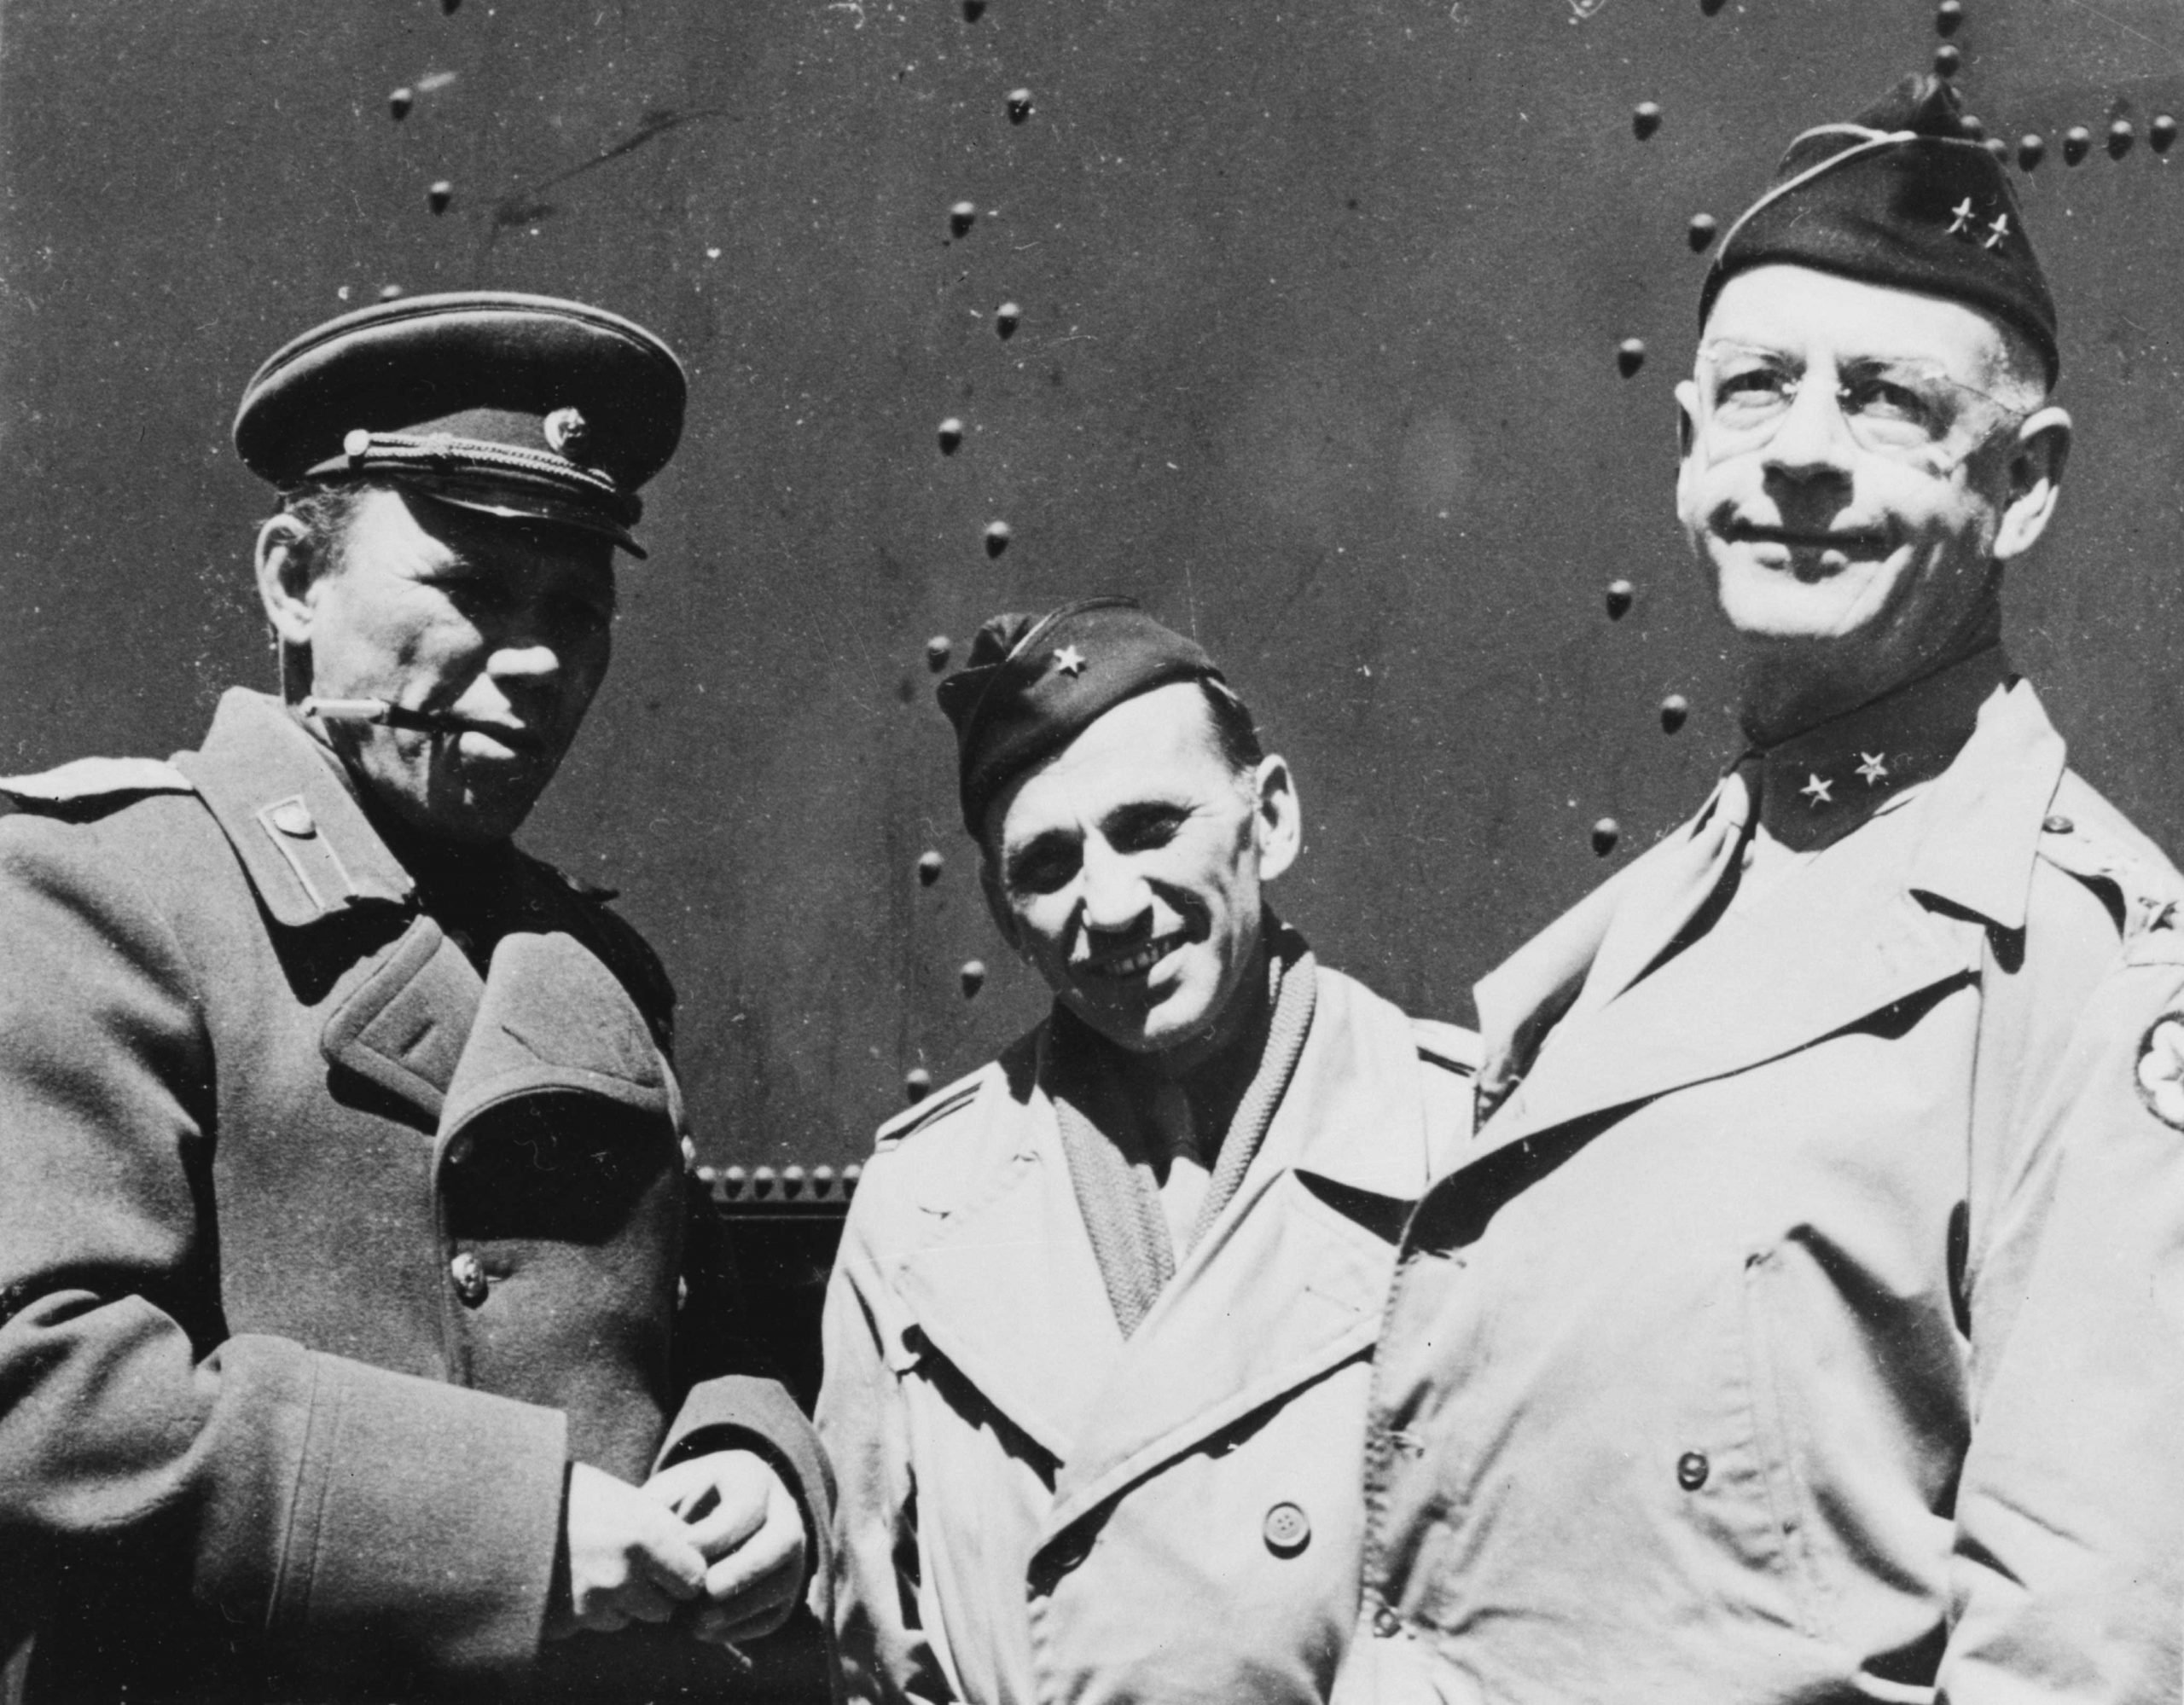 Soviet General A. M. Korolev, General Scott and General Connelly